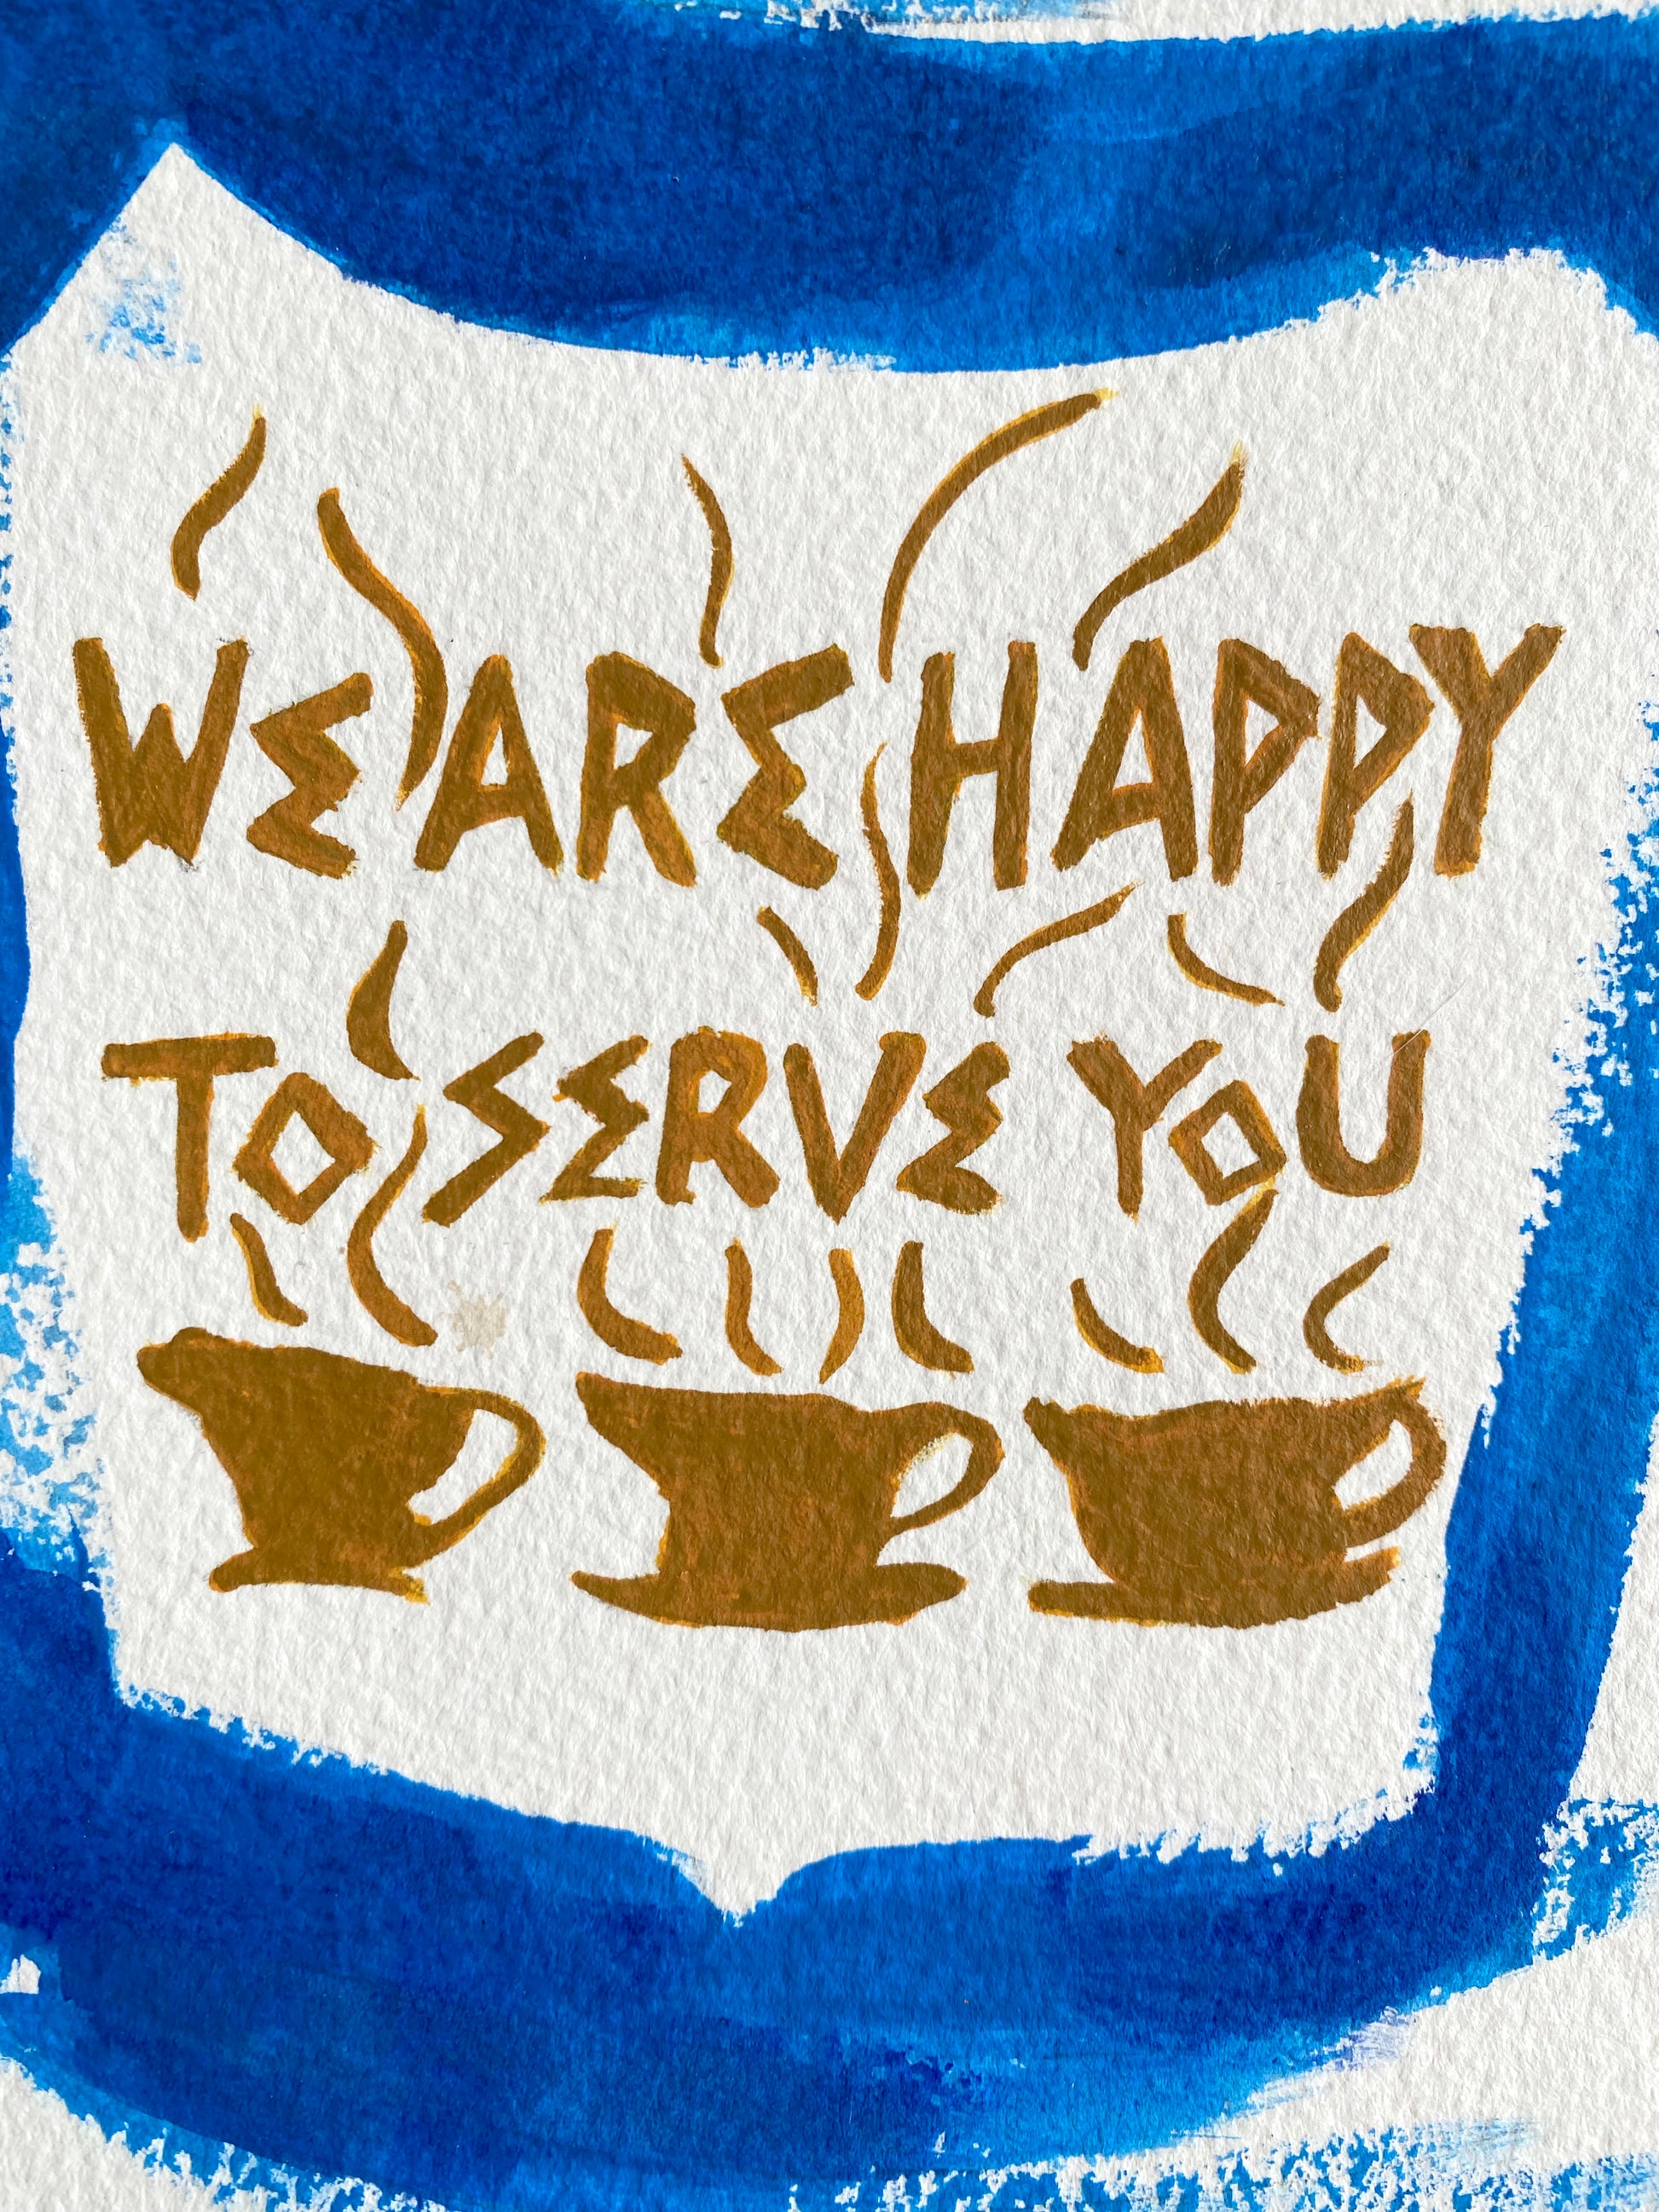 NY Coffee Cup we Are Happy to Serve You Art Print New York City